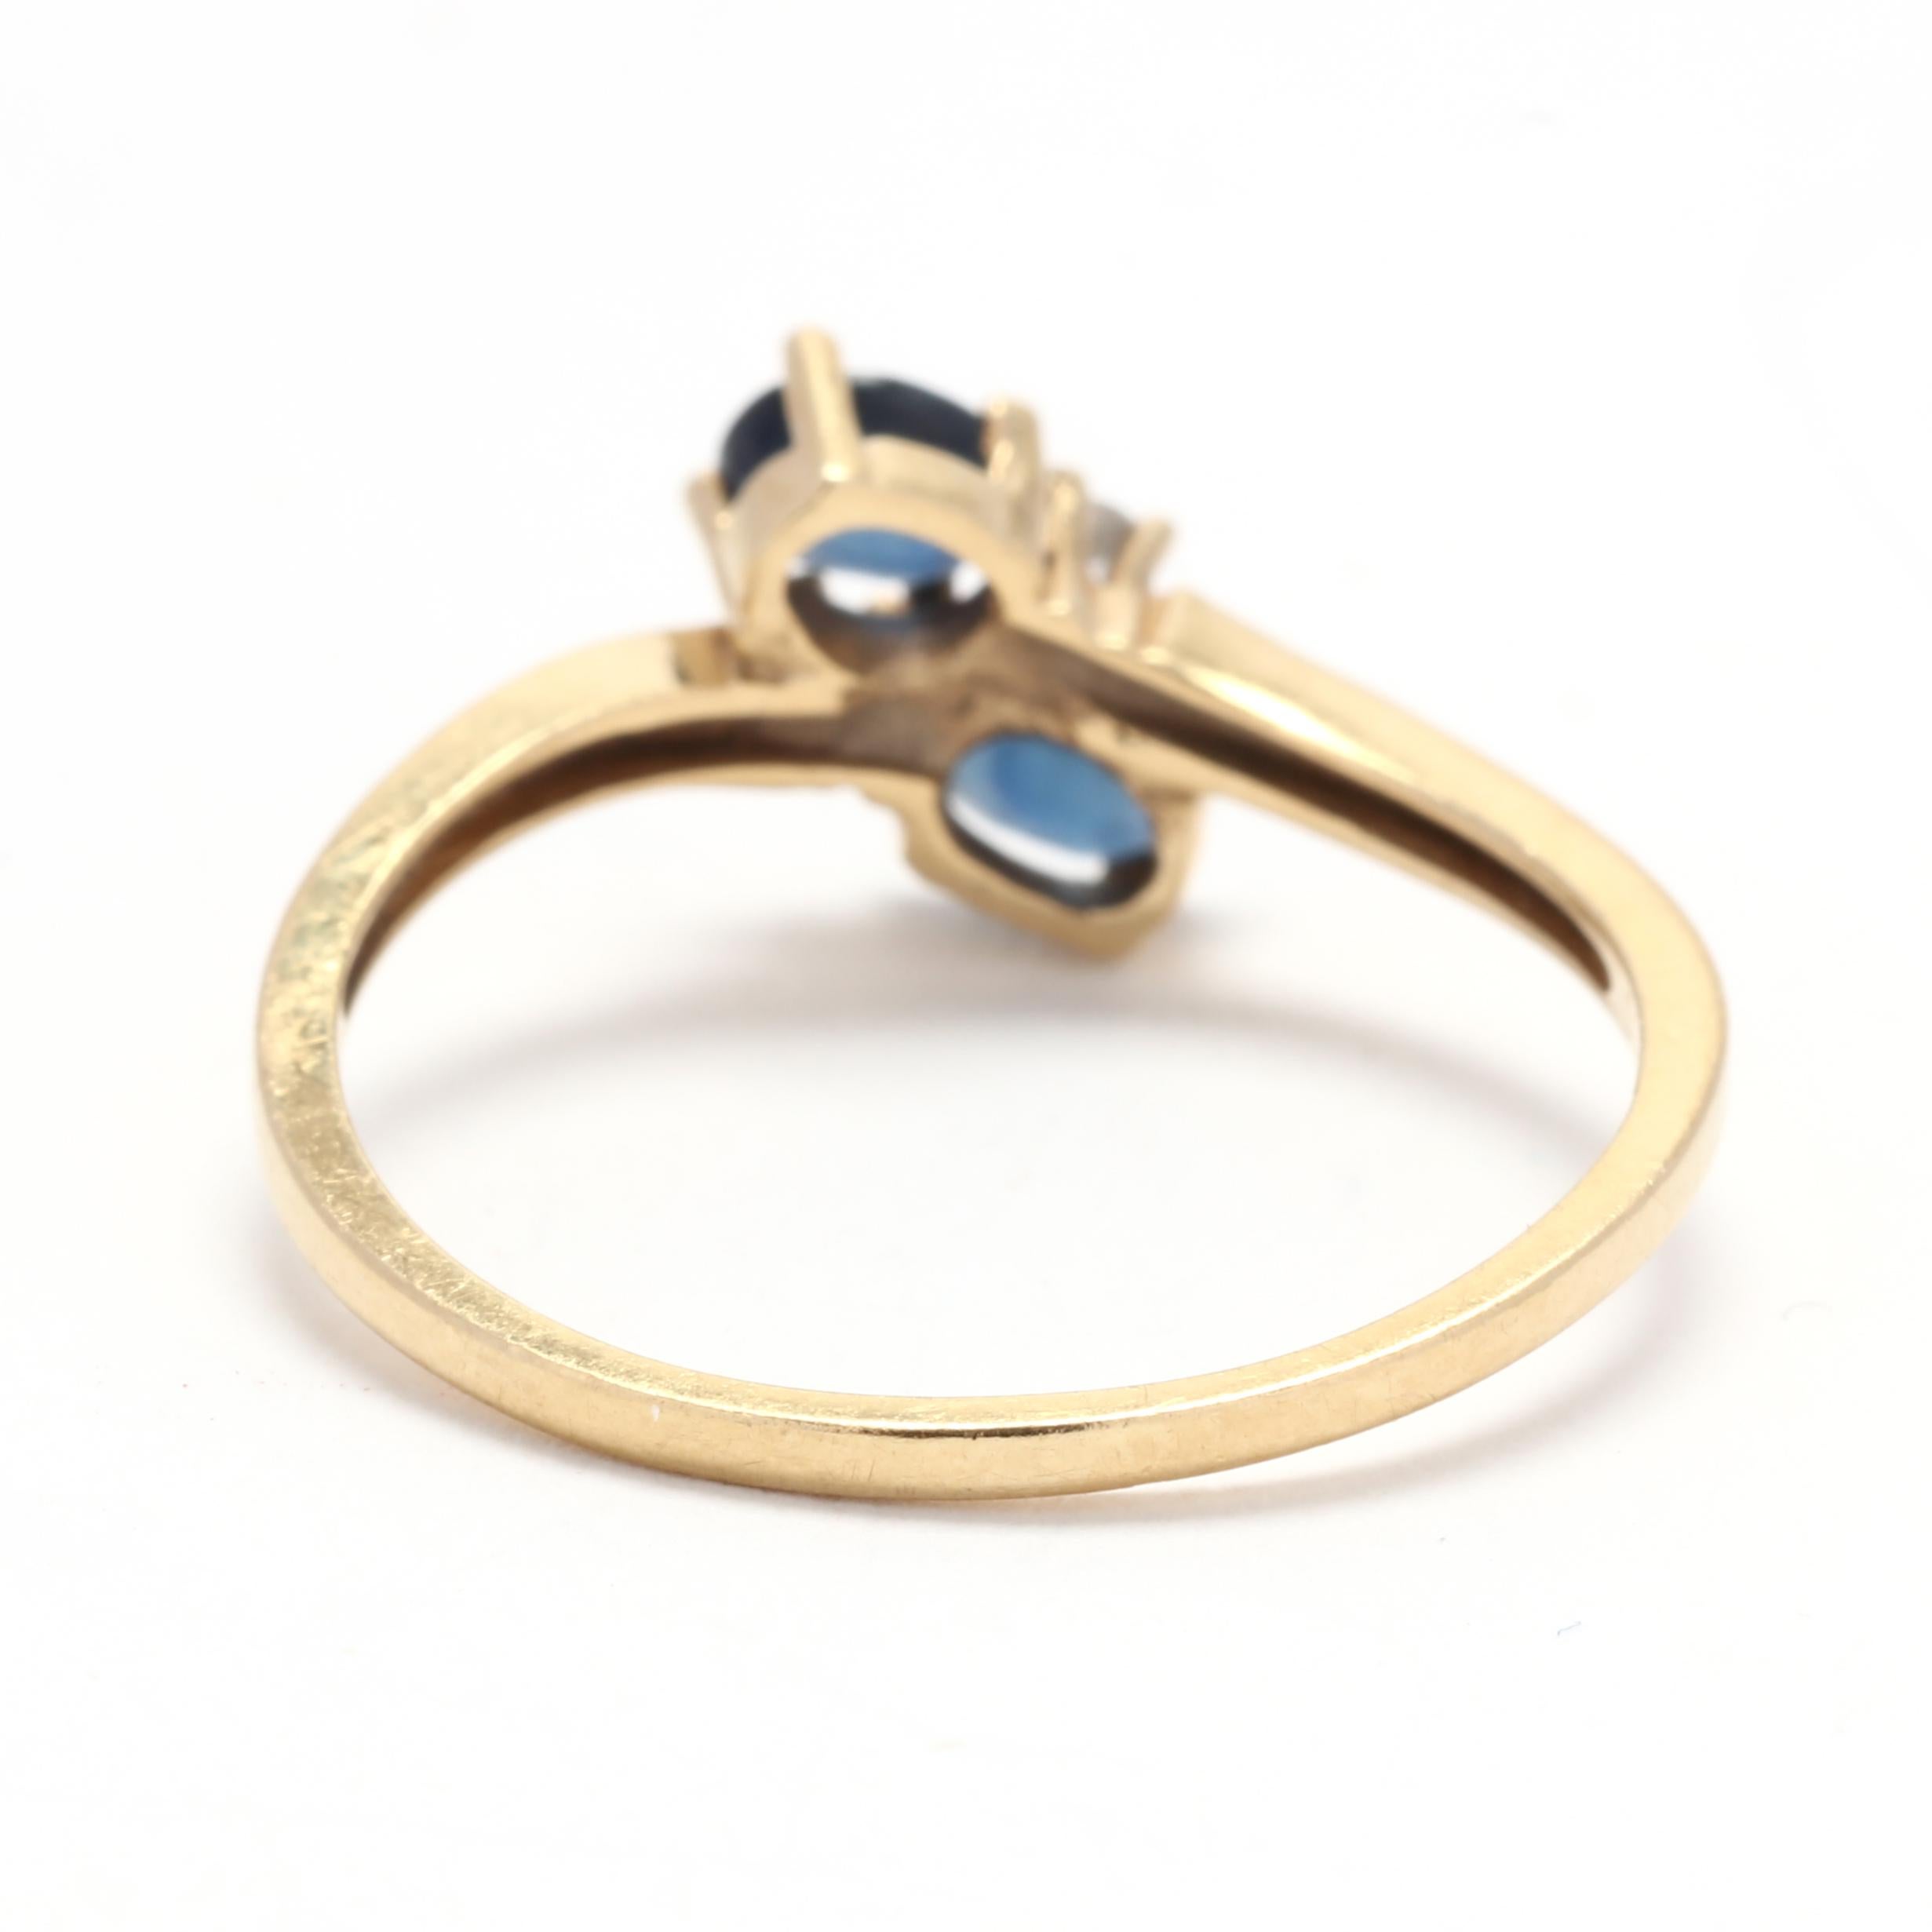 Oval Cut 0.54ctw Sapphire Diamond Toi et Moi Ring, 18K Yellow Gold, Ring Size 6.5, Simple For Sale